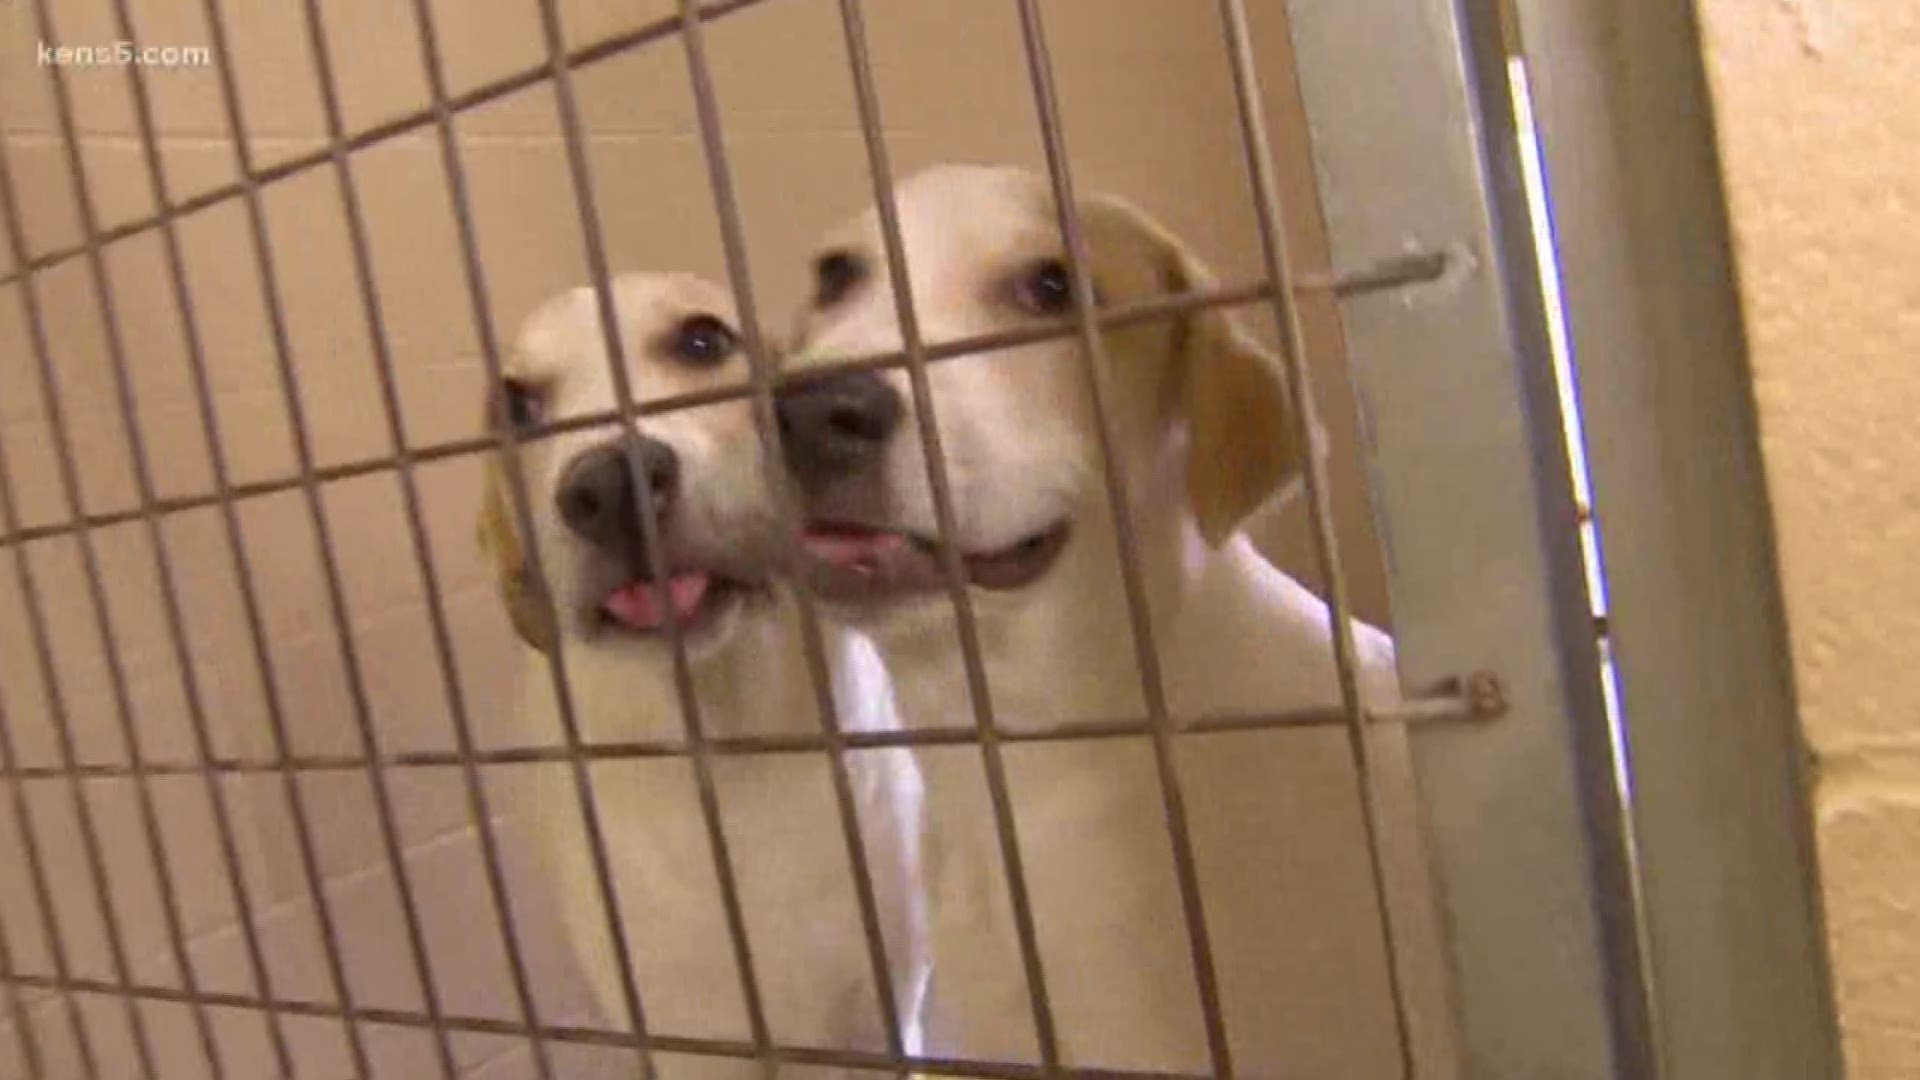 More than 3,000 animals have been taken in by the shelter in 2019. In September so far, they haven't had many families come in and adopt new pets.